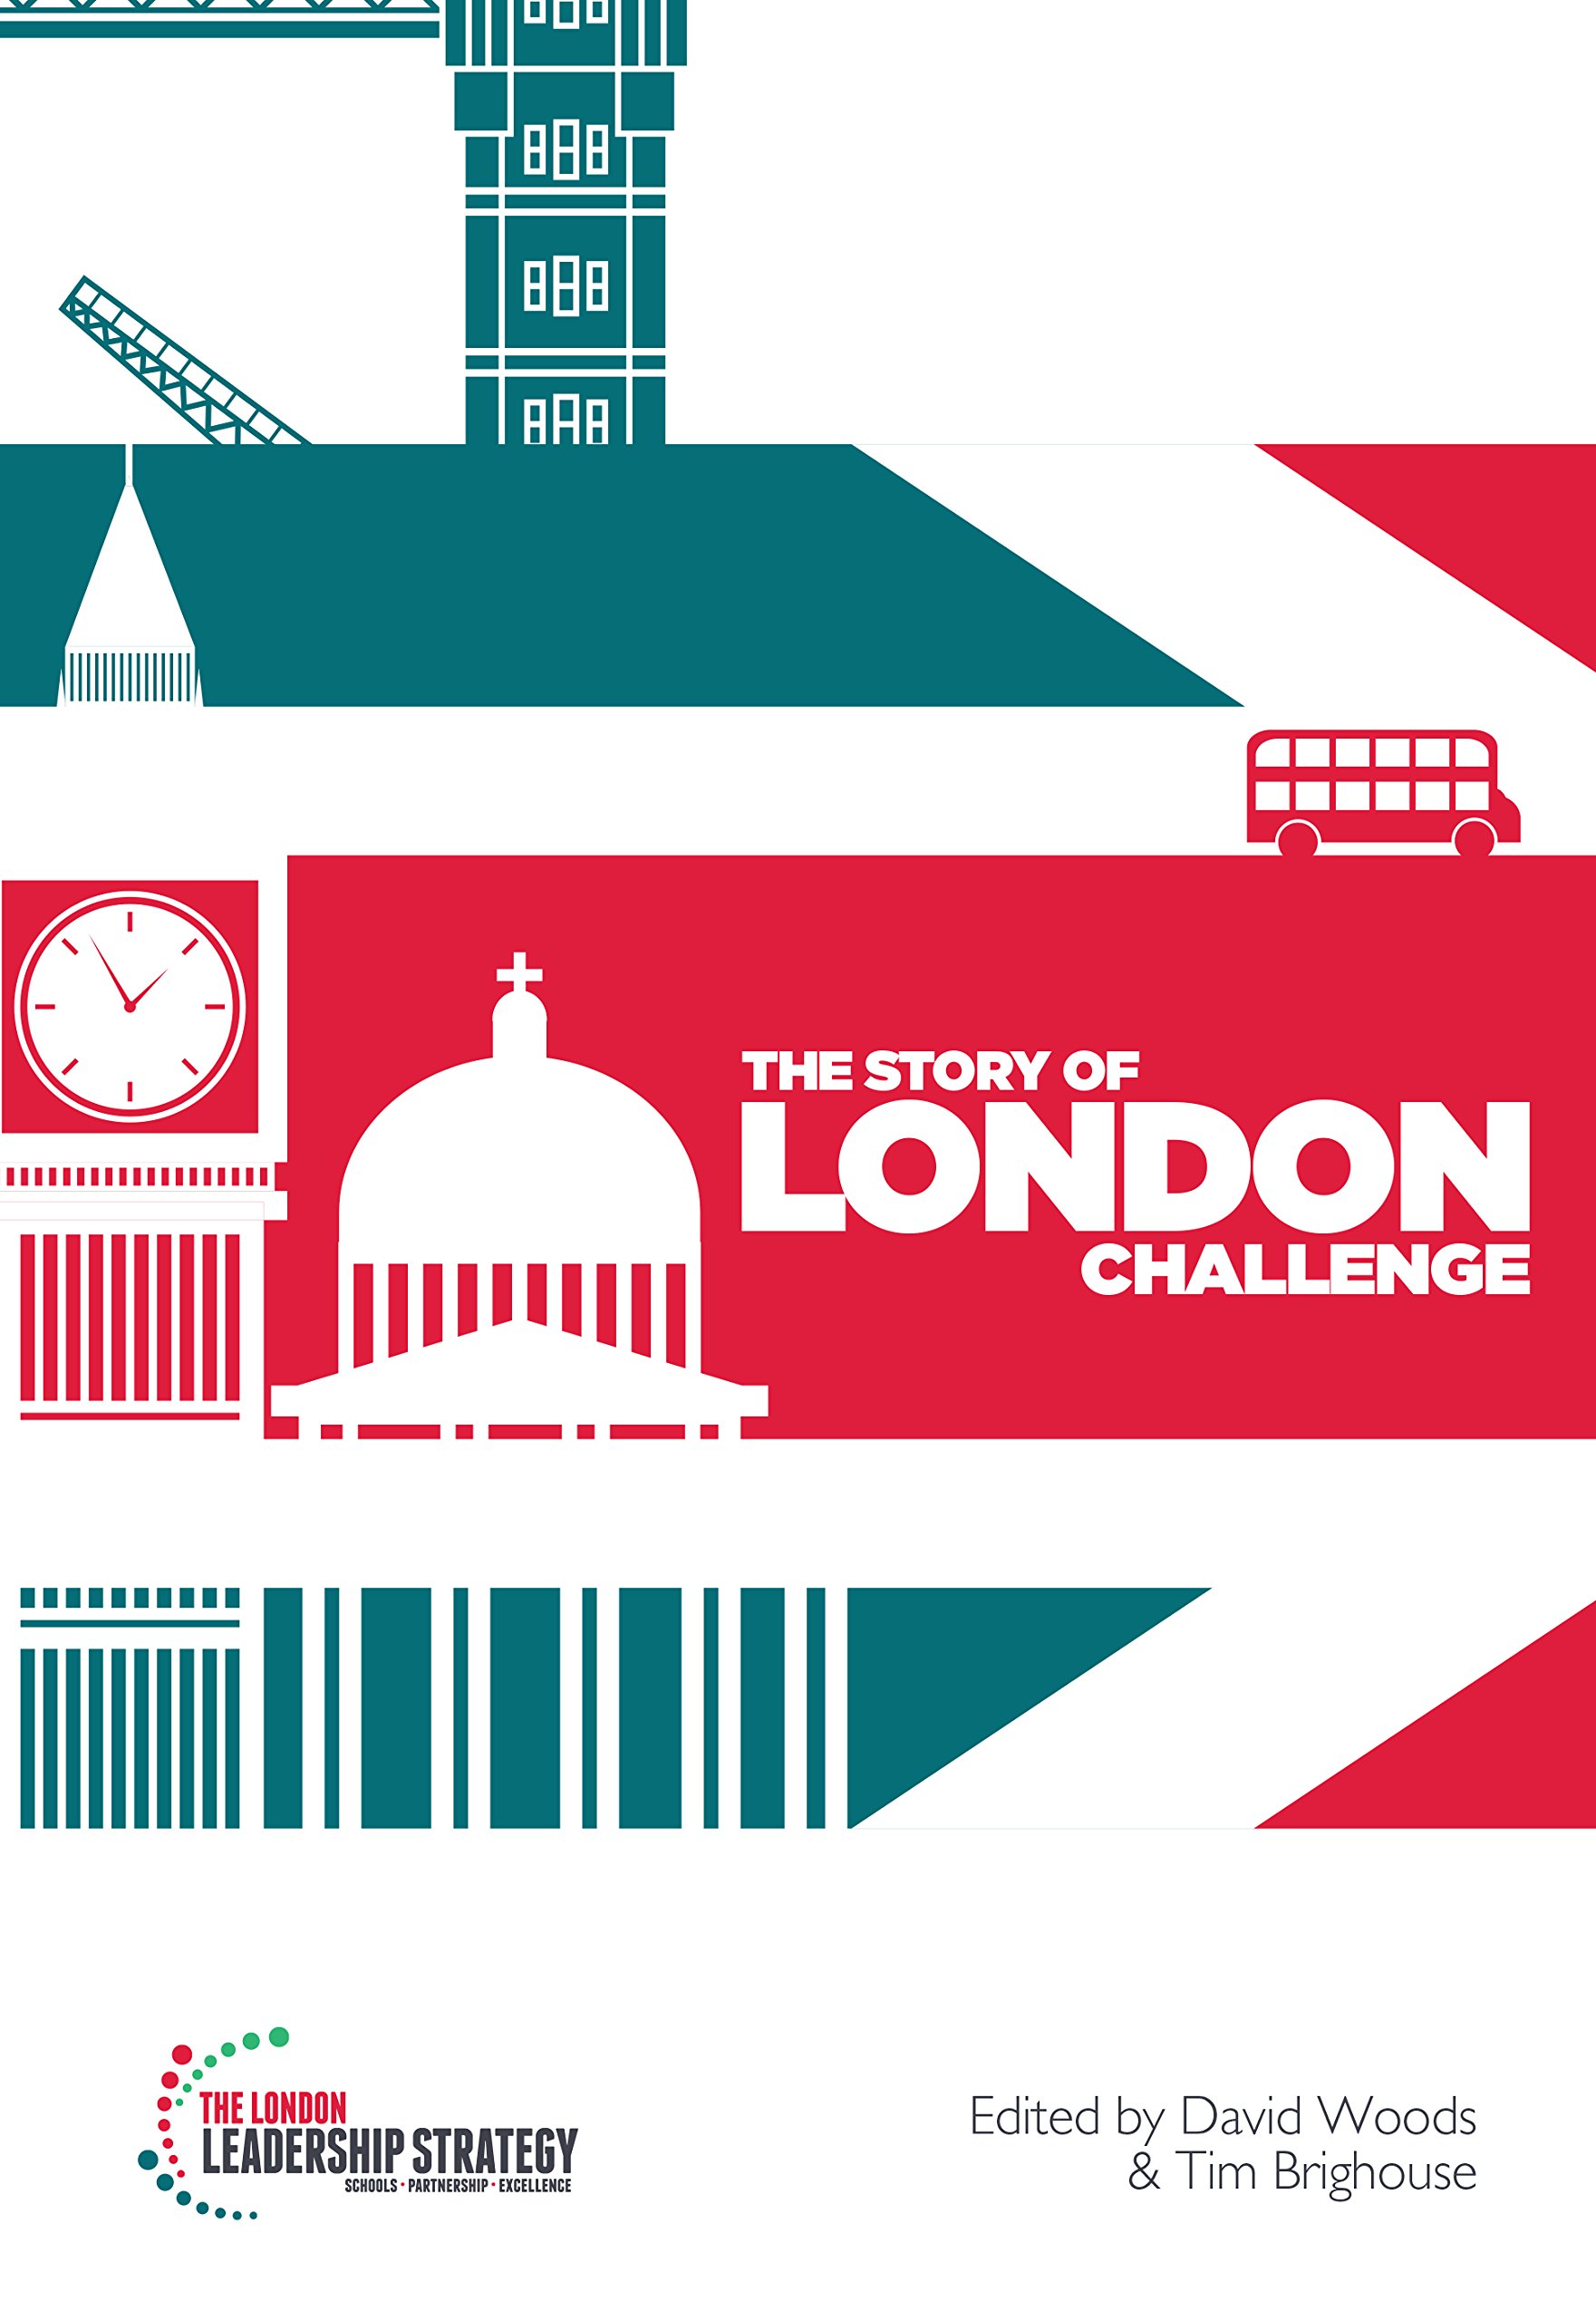 OLD - The Story of London Challenge